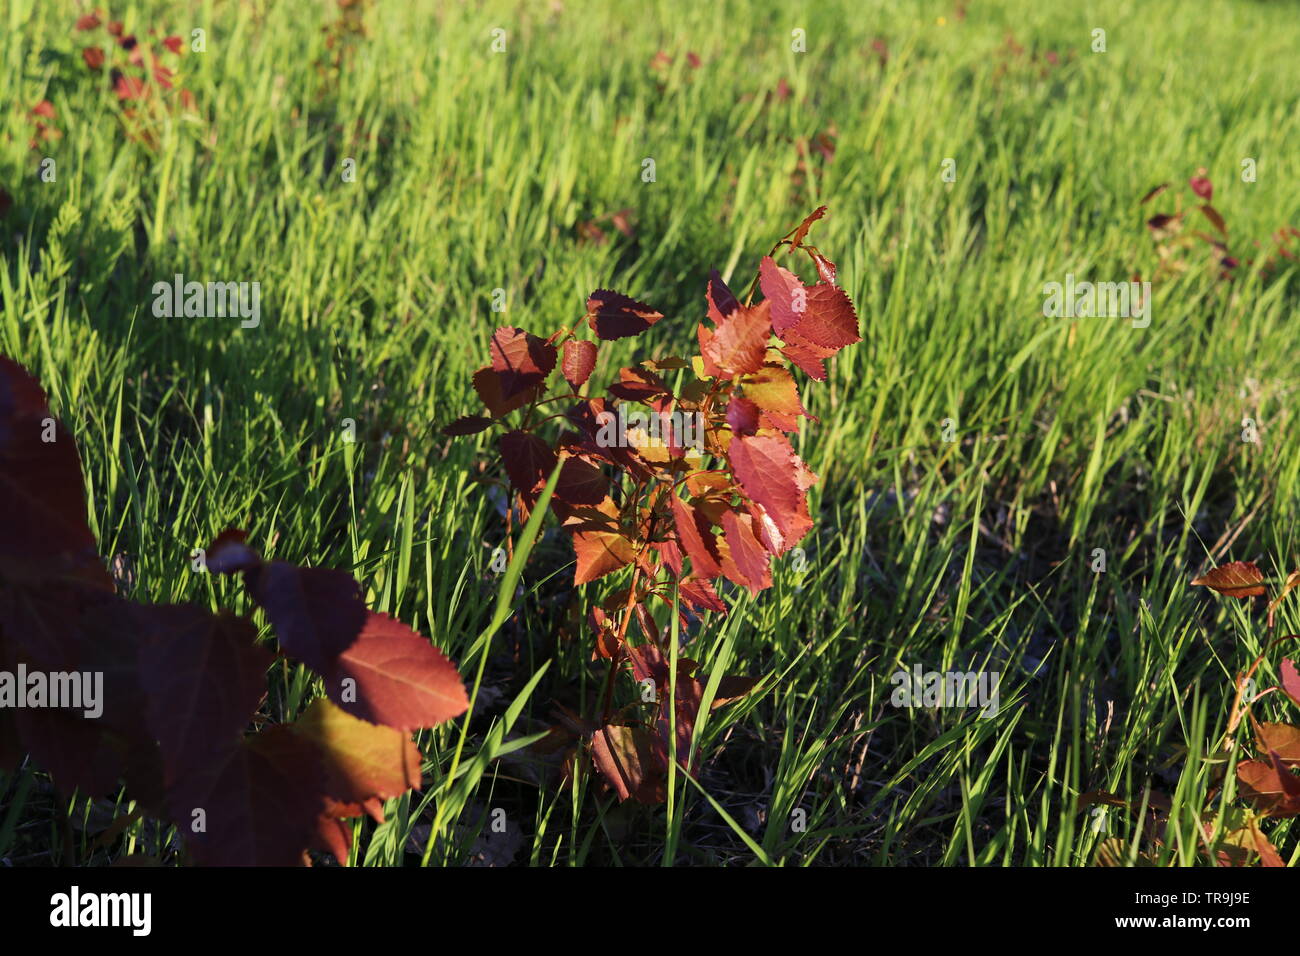 A young red plant on a grass field in sunset. Stock Photo